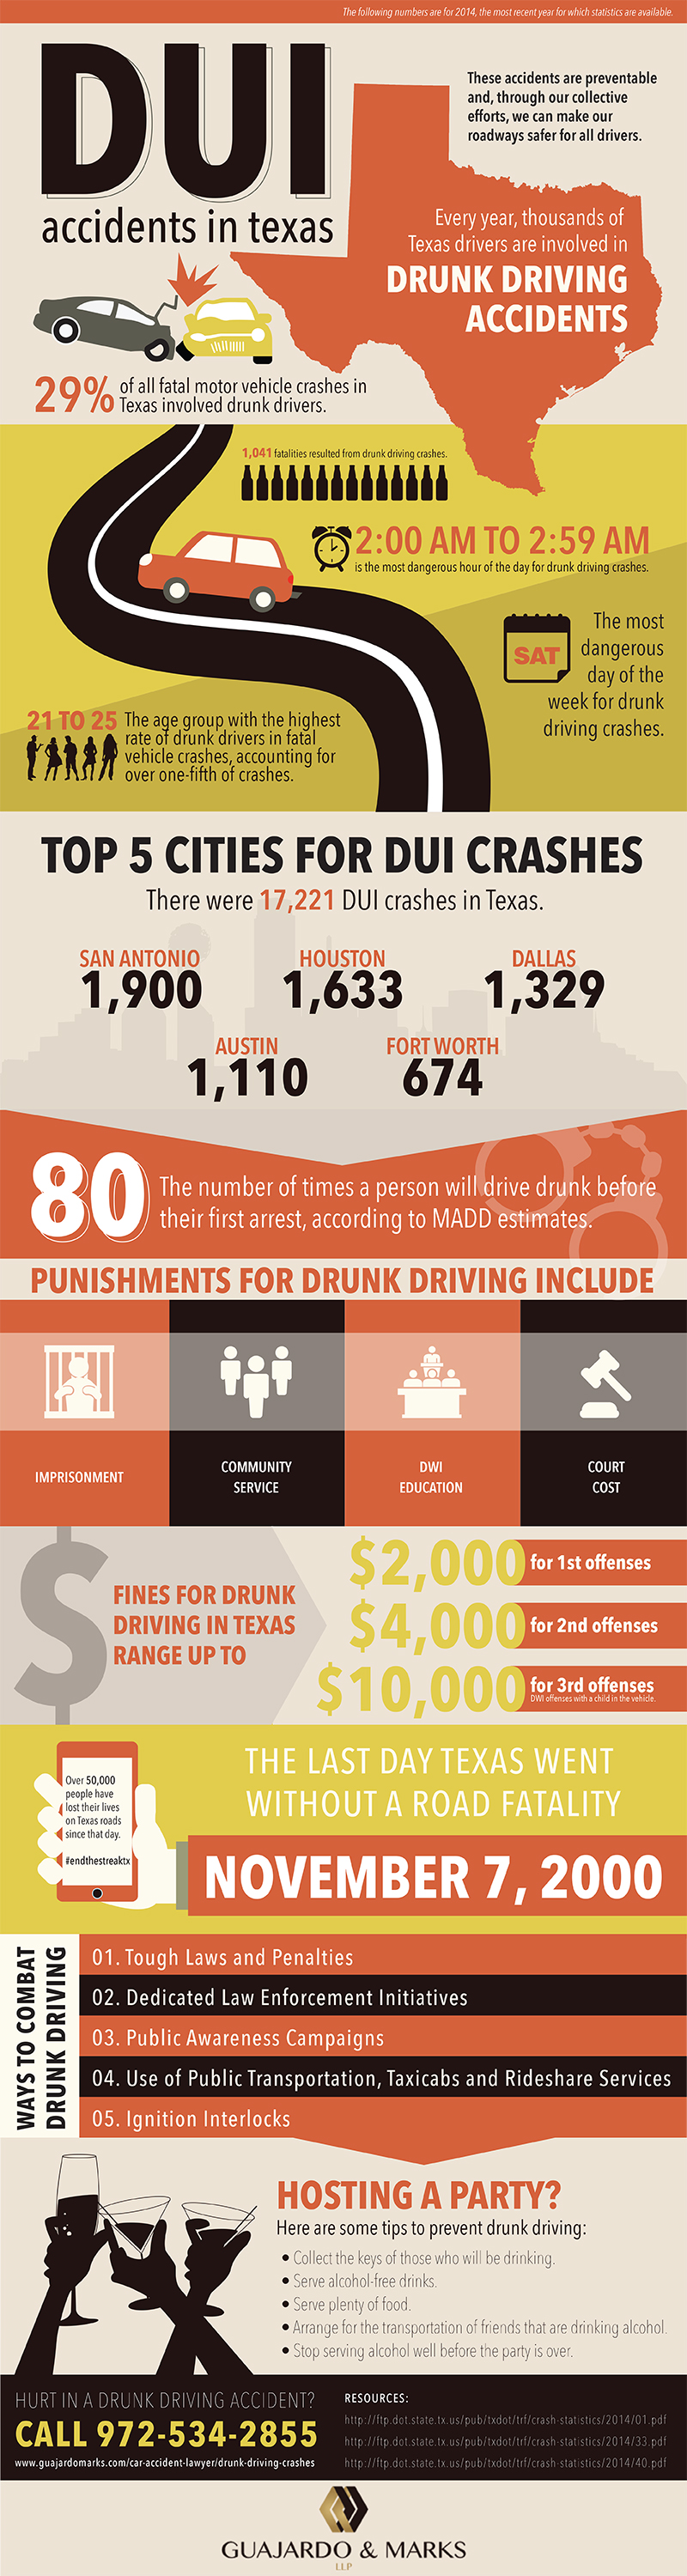 DUI Accidents in Texas